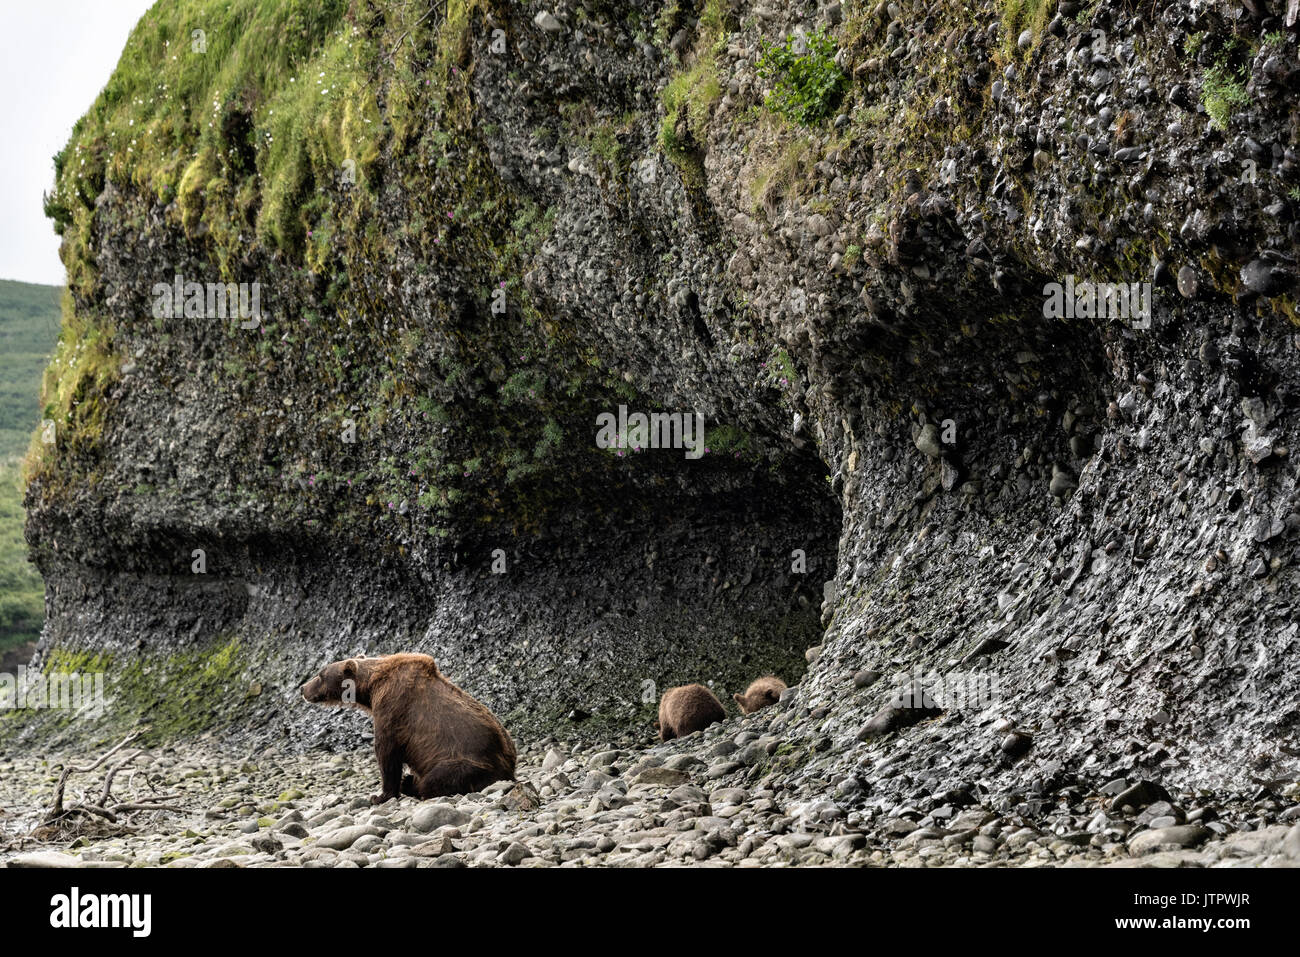 A brown bear sow known as Bearded Lady protects her spring cubs at the entrance to a small cave at the McNeil River State Game Sanctuary on the Kenai Peninsula, Alaska. The remote site is accessed only with a special permit and is the world’s largest seasonal population of brown bears in their natural environment. Stock Photo